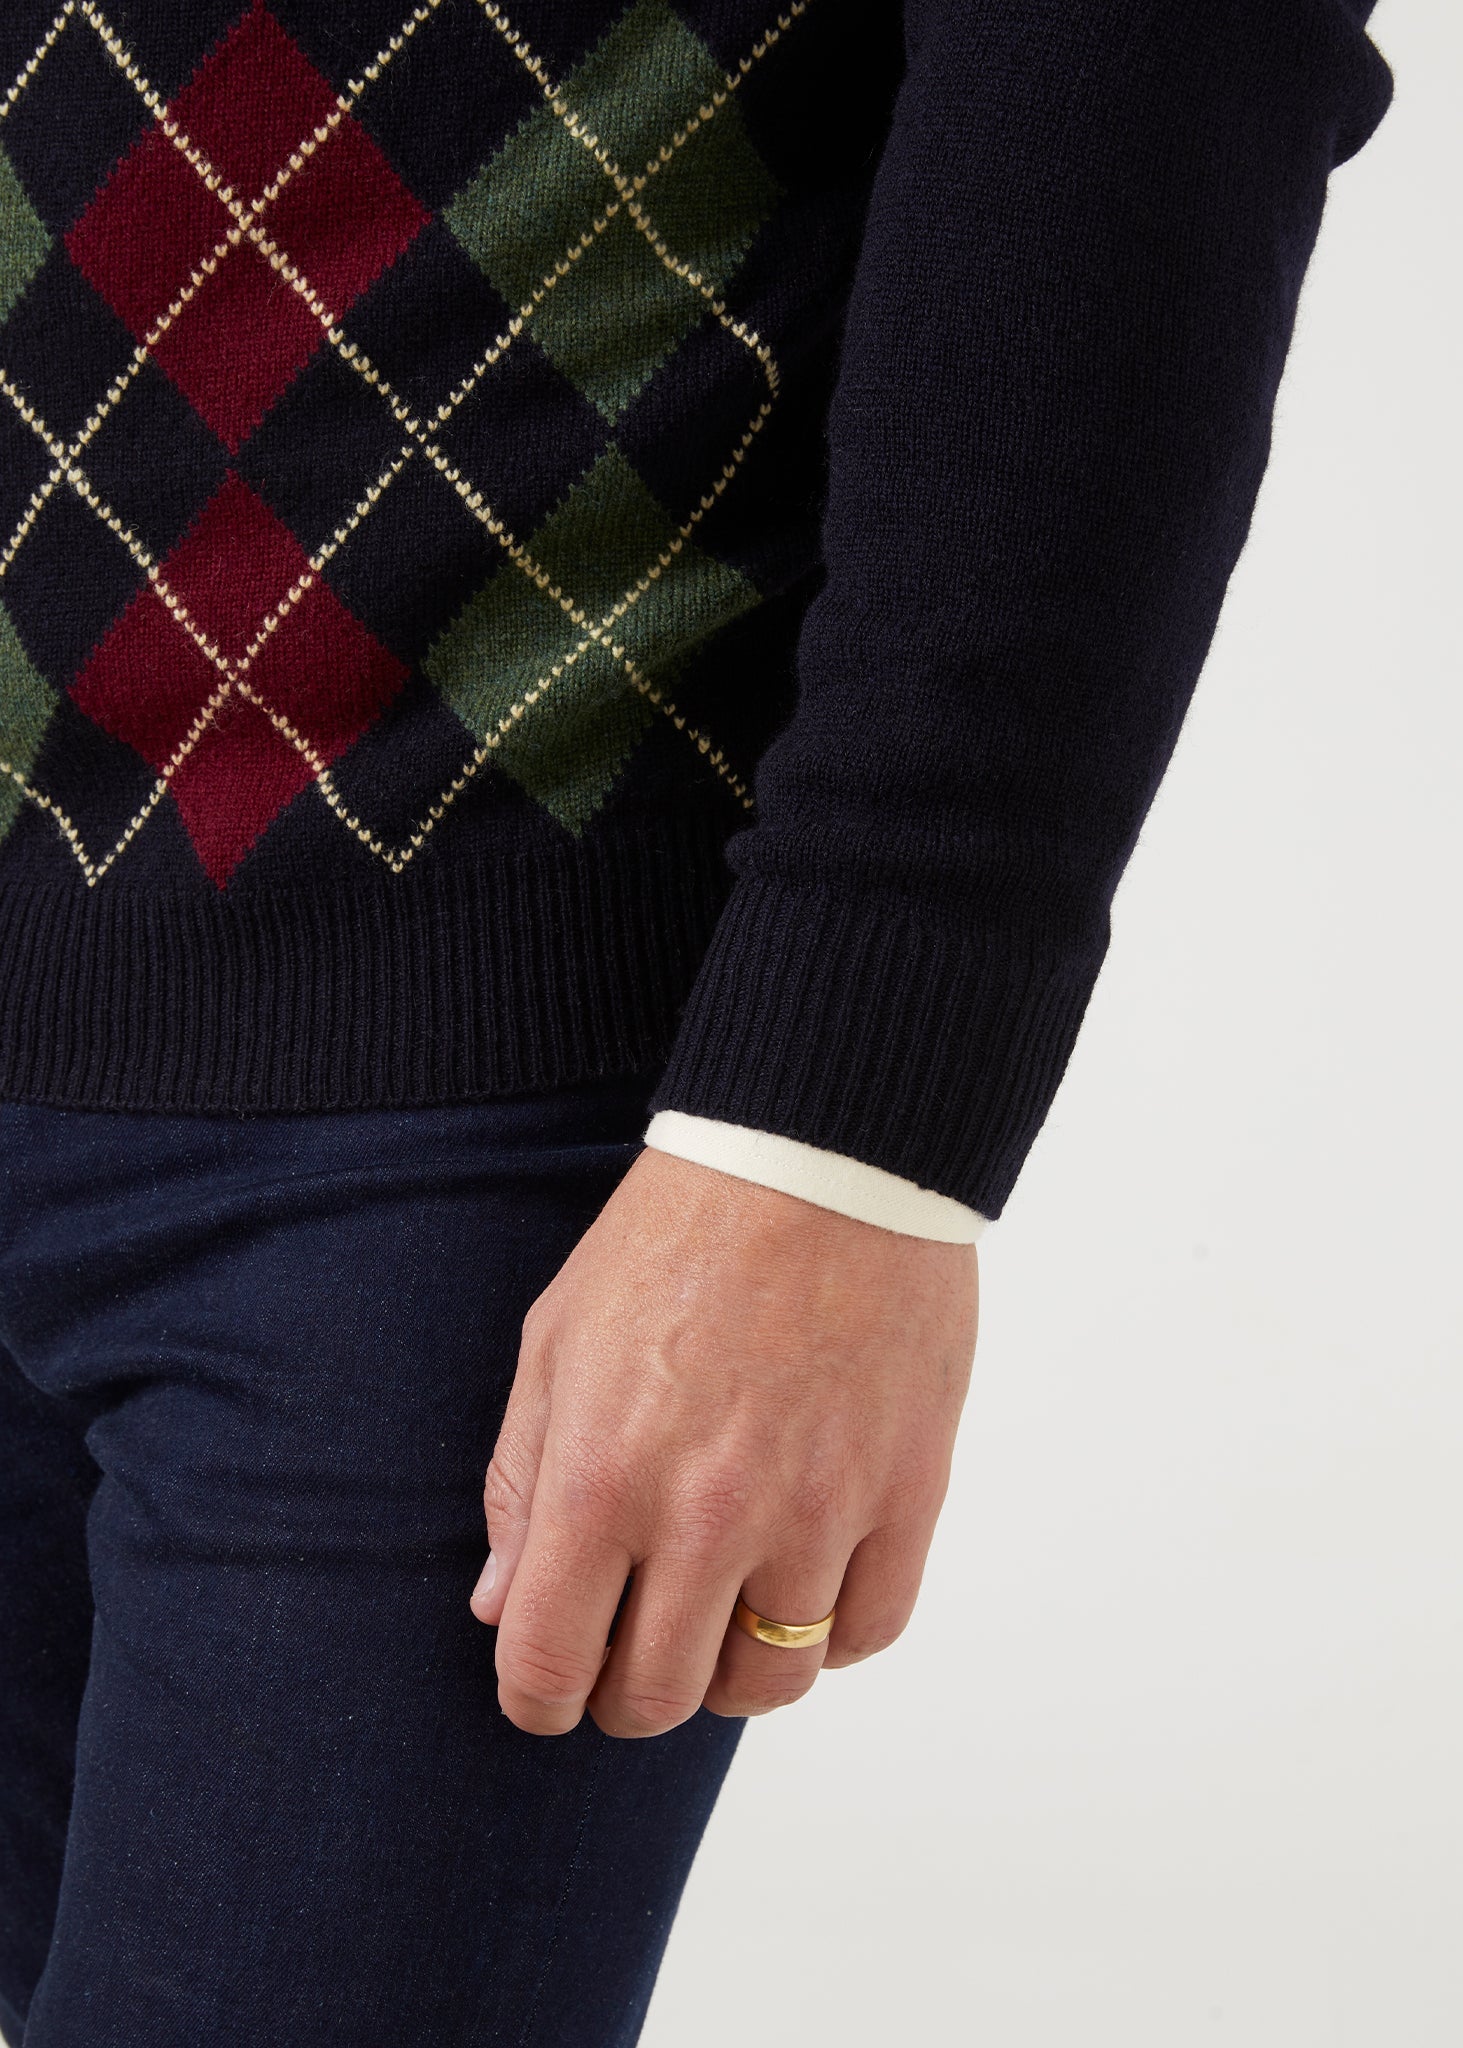 mens-argyle-front-lambswool-jumper